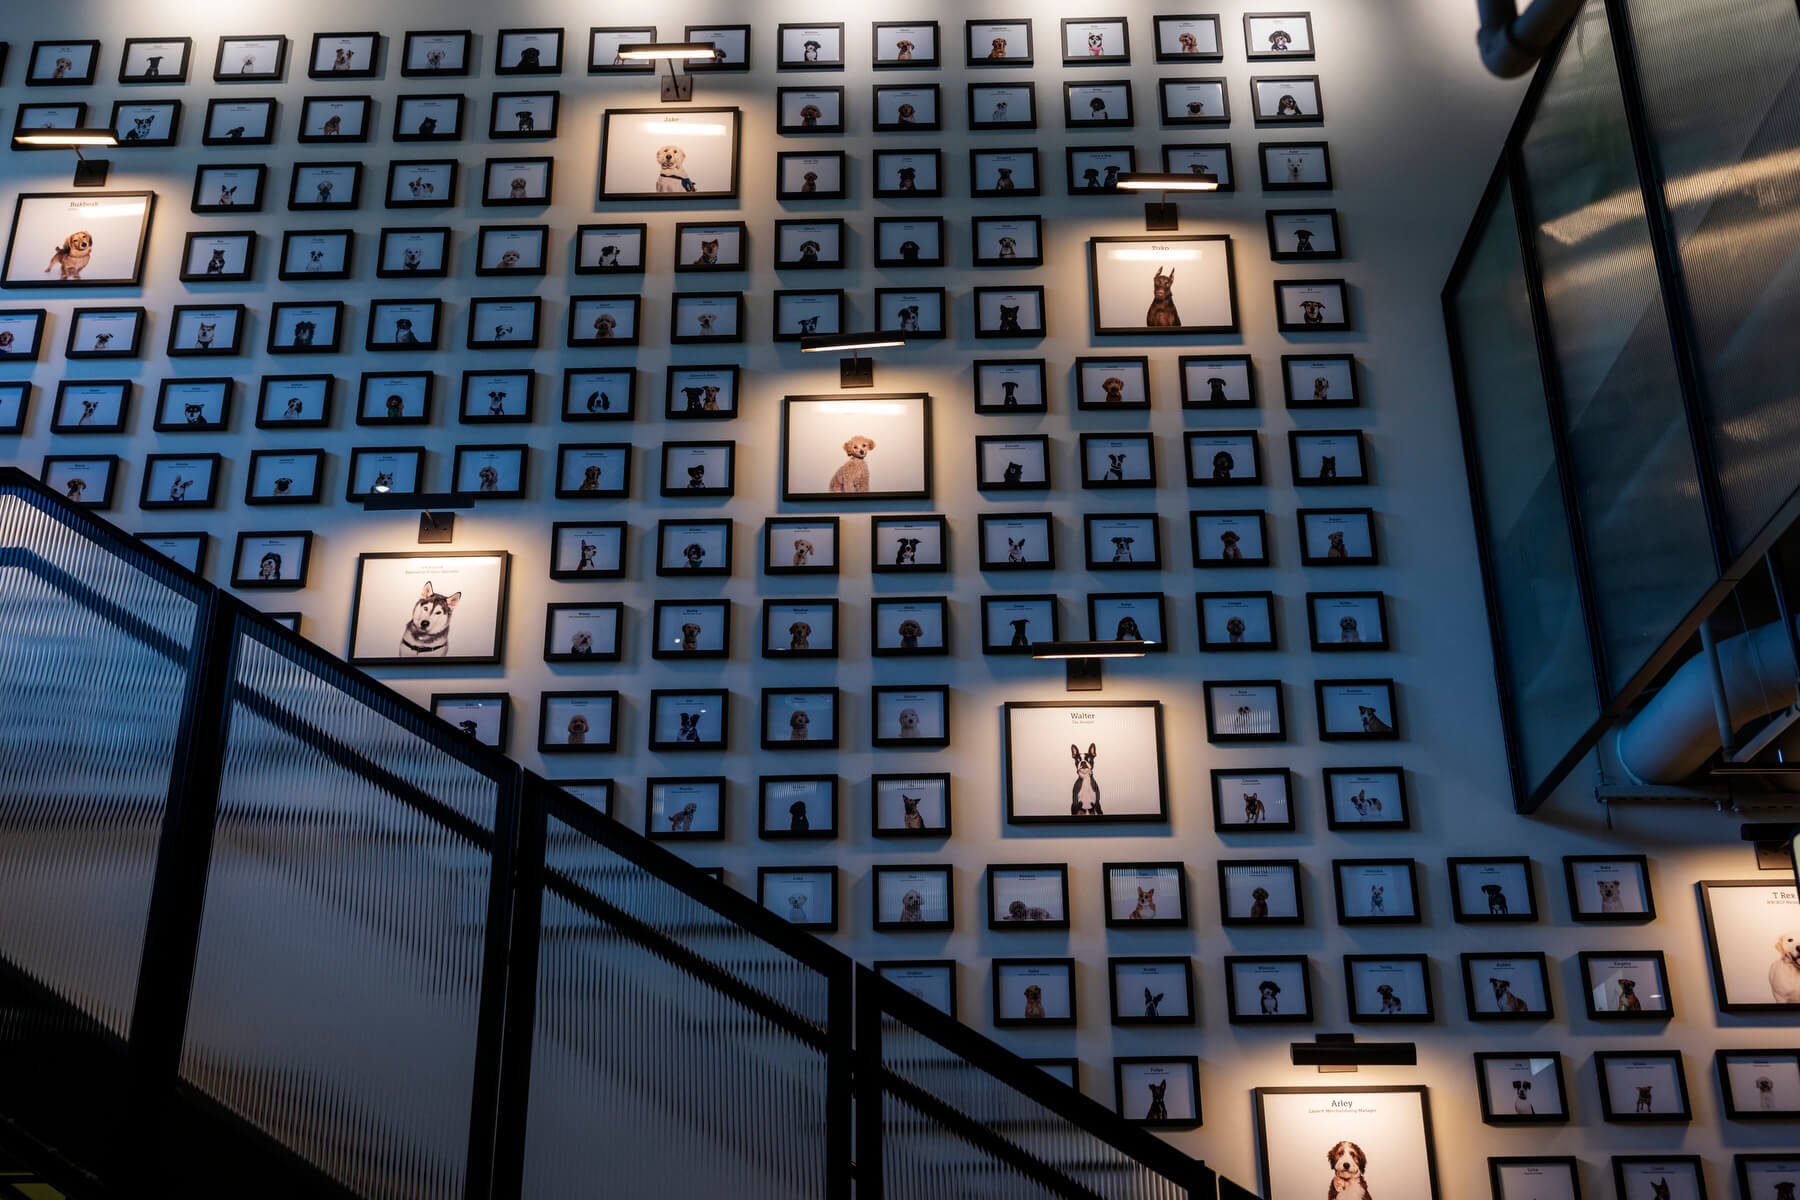 An image of a wall of images of dogs. Some are lit up and the rest of the wall is dark.